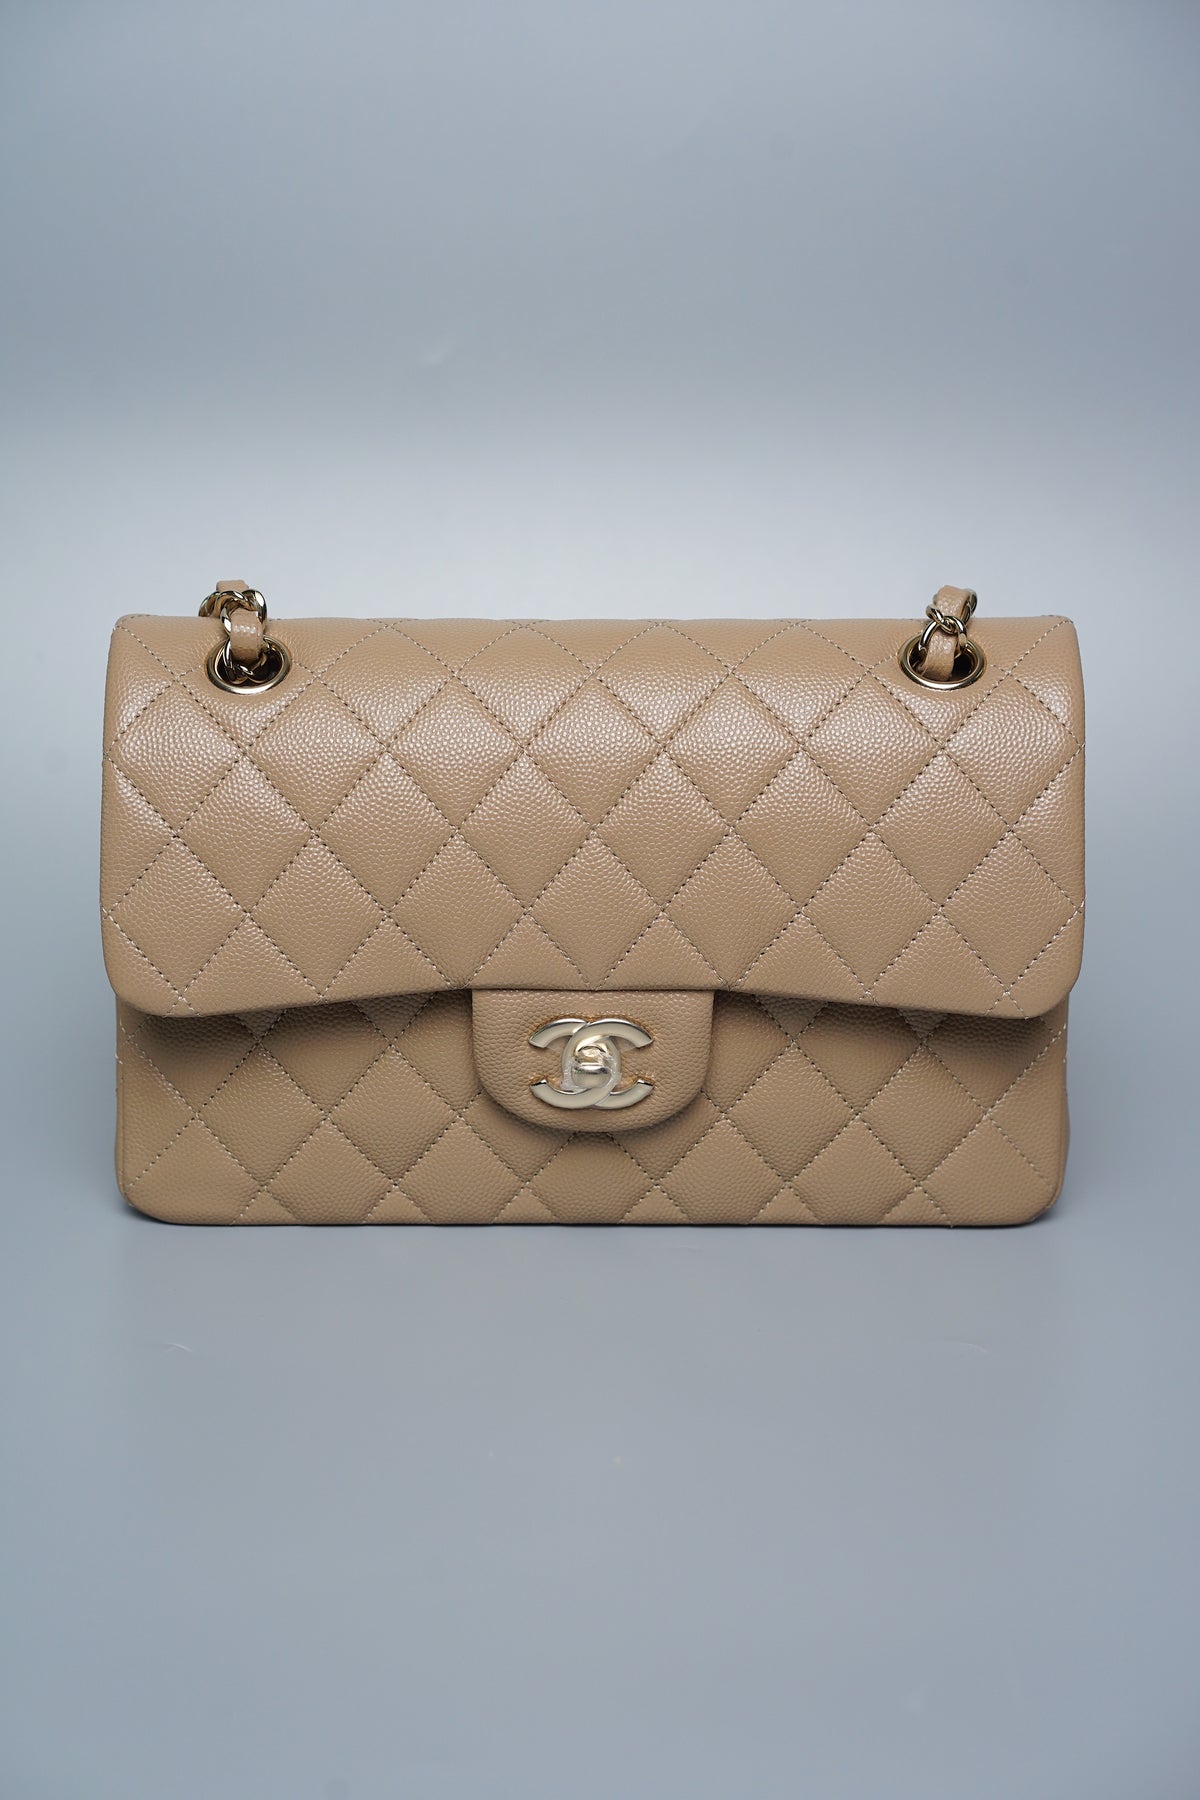 Chanel 22A Small Double Flap in Dark Beige Ghw (Brand New